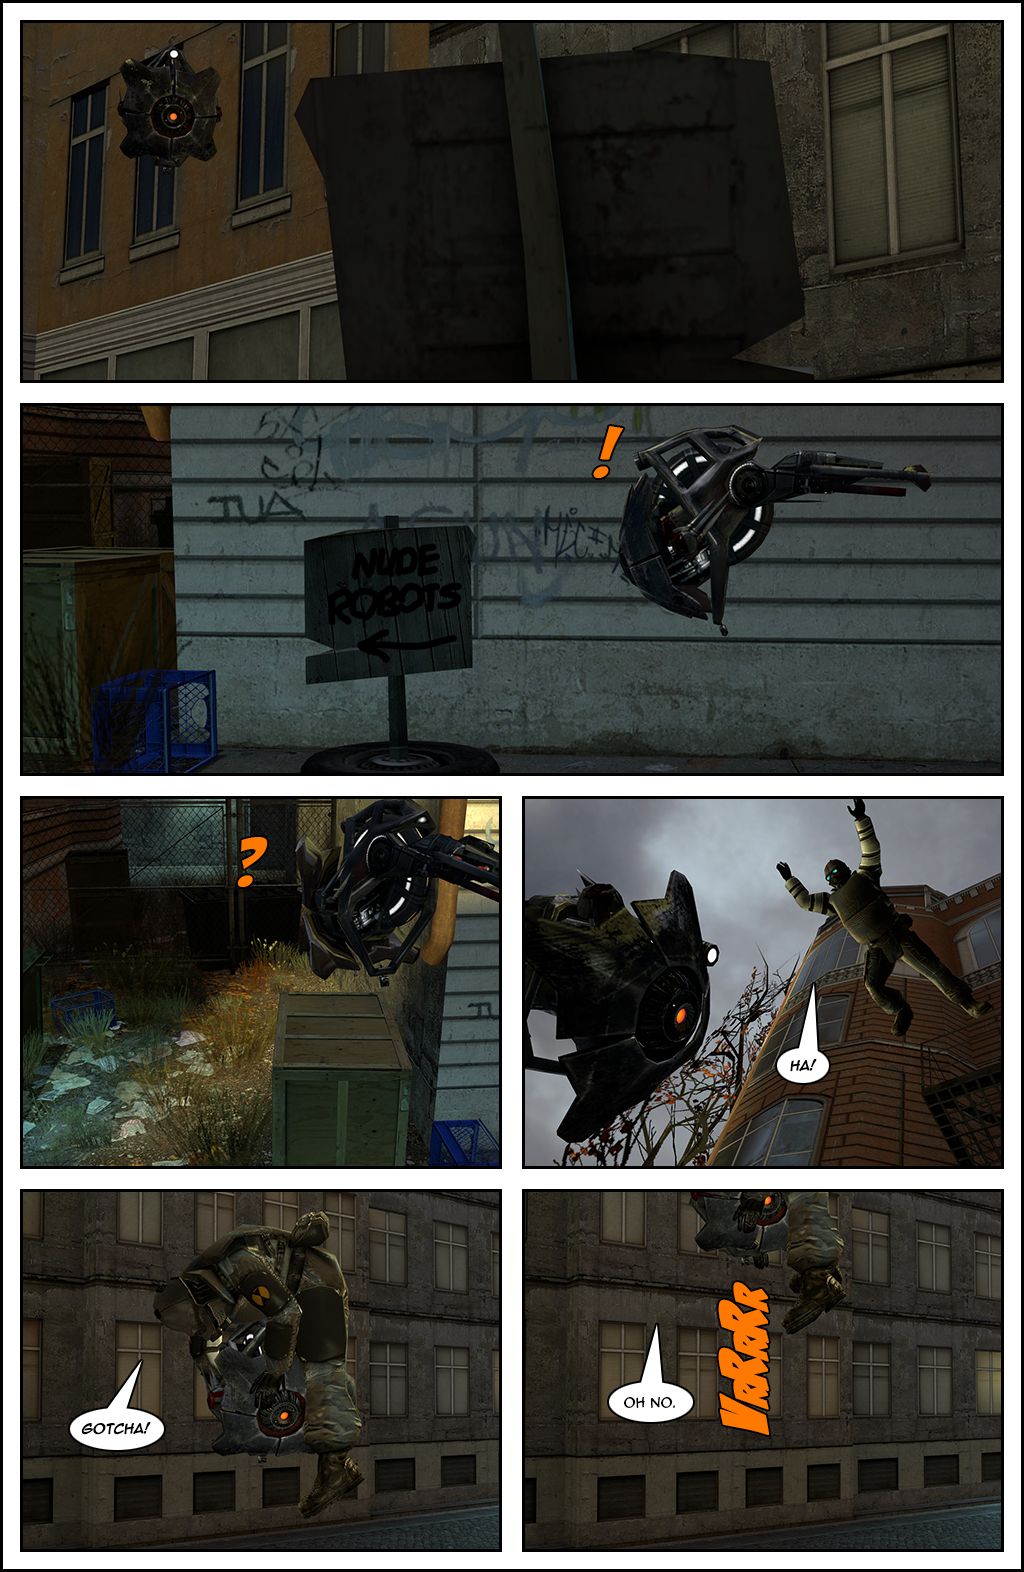 The scanner notices a wooden sign nearby that says nude robots and has an arrow pointing towards an alley. It goes to check, but finds nothing there. Suddenly, the soldier leaps from a railway above and falls on the scanner, screaming gotcha. The scanner then starts flying up, to which the soldier says oh, no.